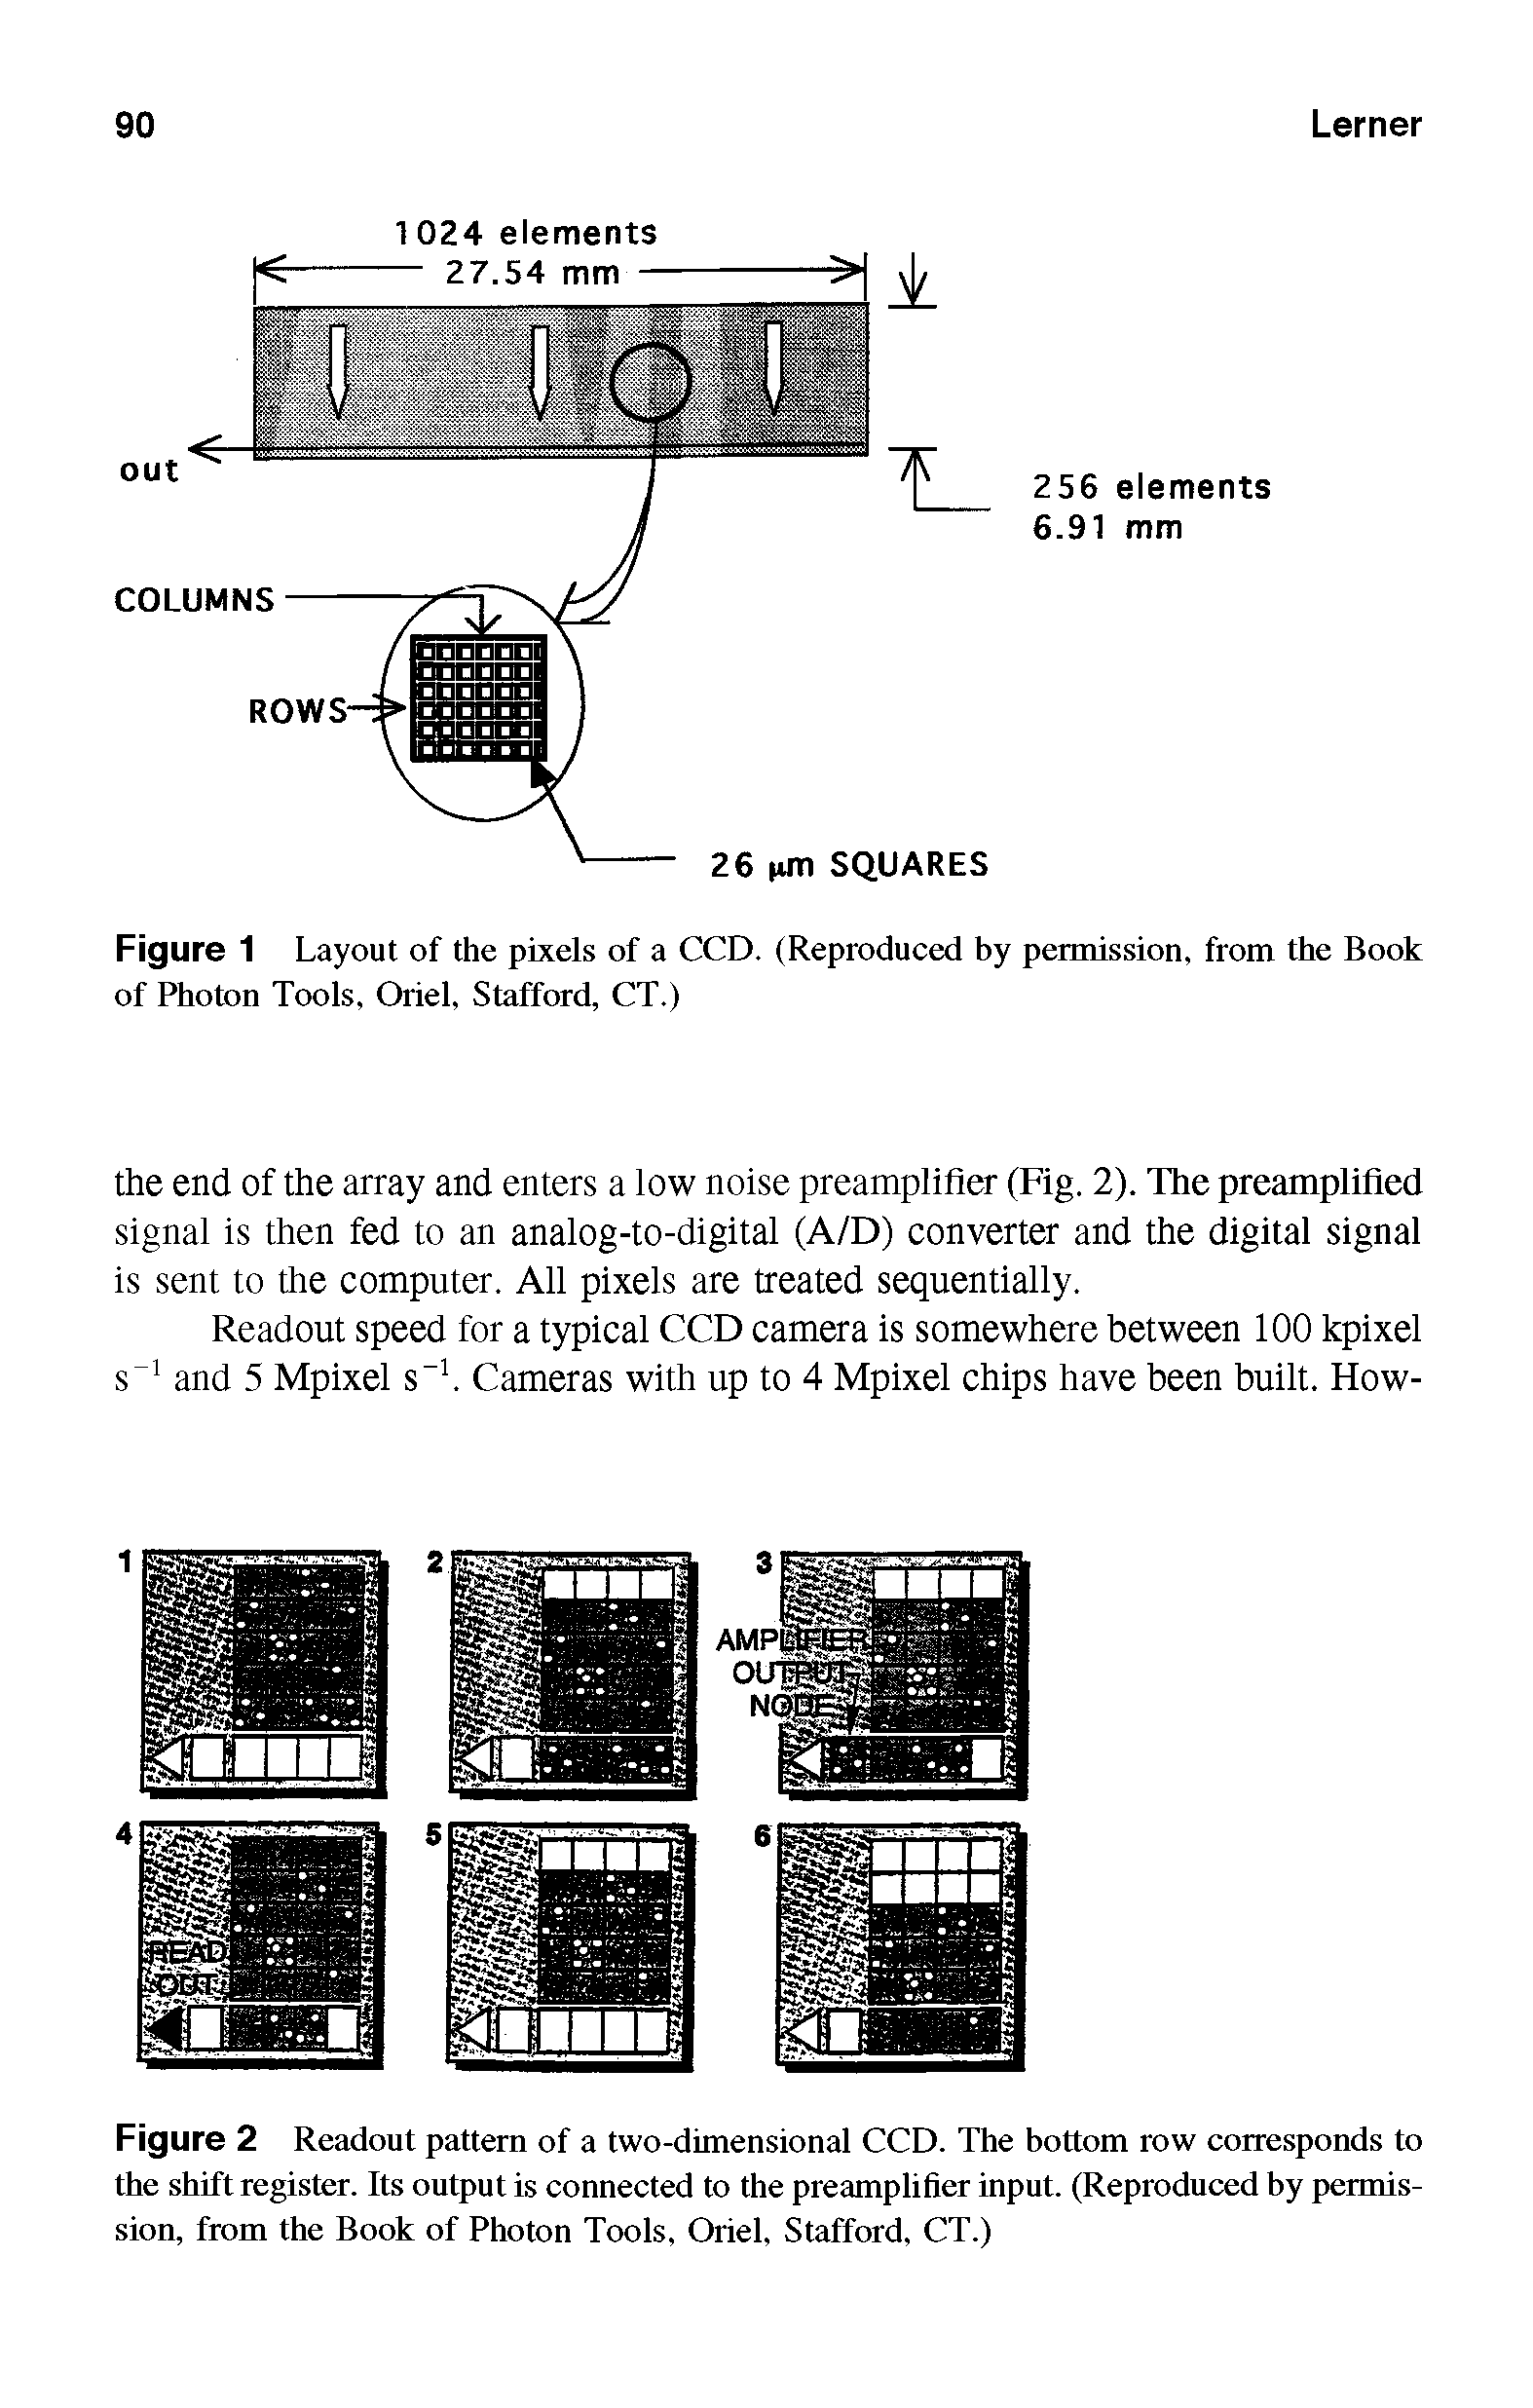 Figure 2 Readout pattern of a two-dimensional CCD. The bottom row corresponds to the shift register. Its output is connected to the preamplifier input. (Reproduced by permission, from the Book of Photon Tools, Oriel, Stafford, CT.)...